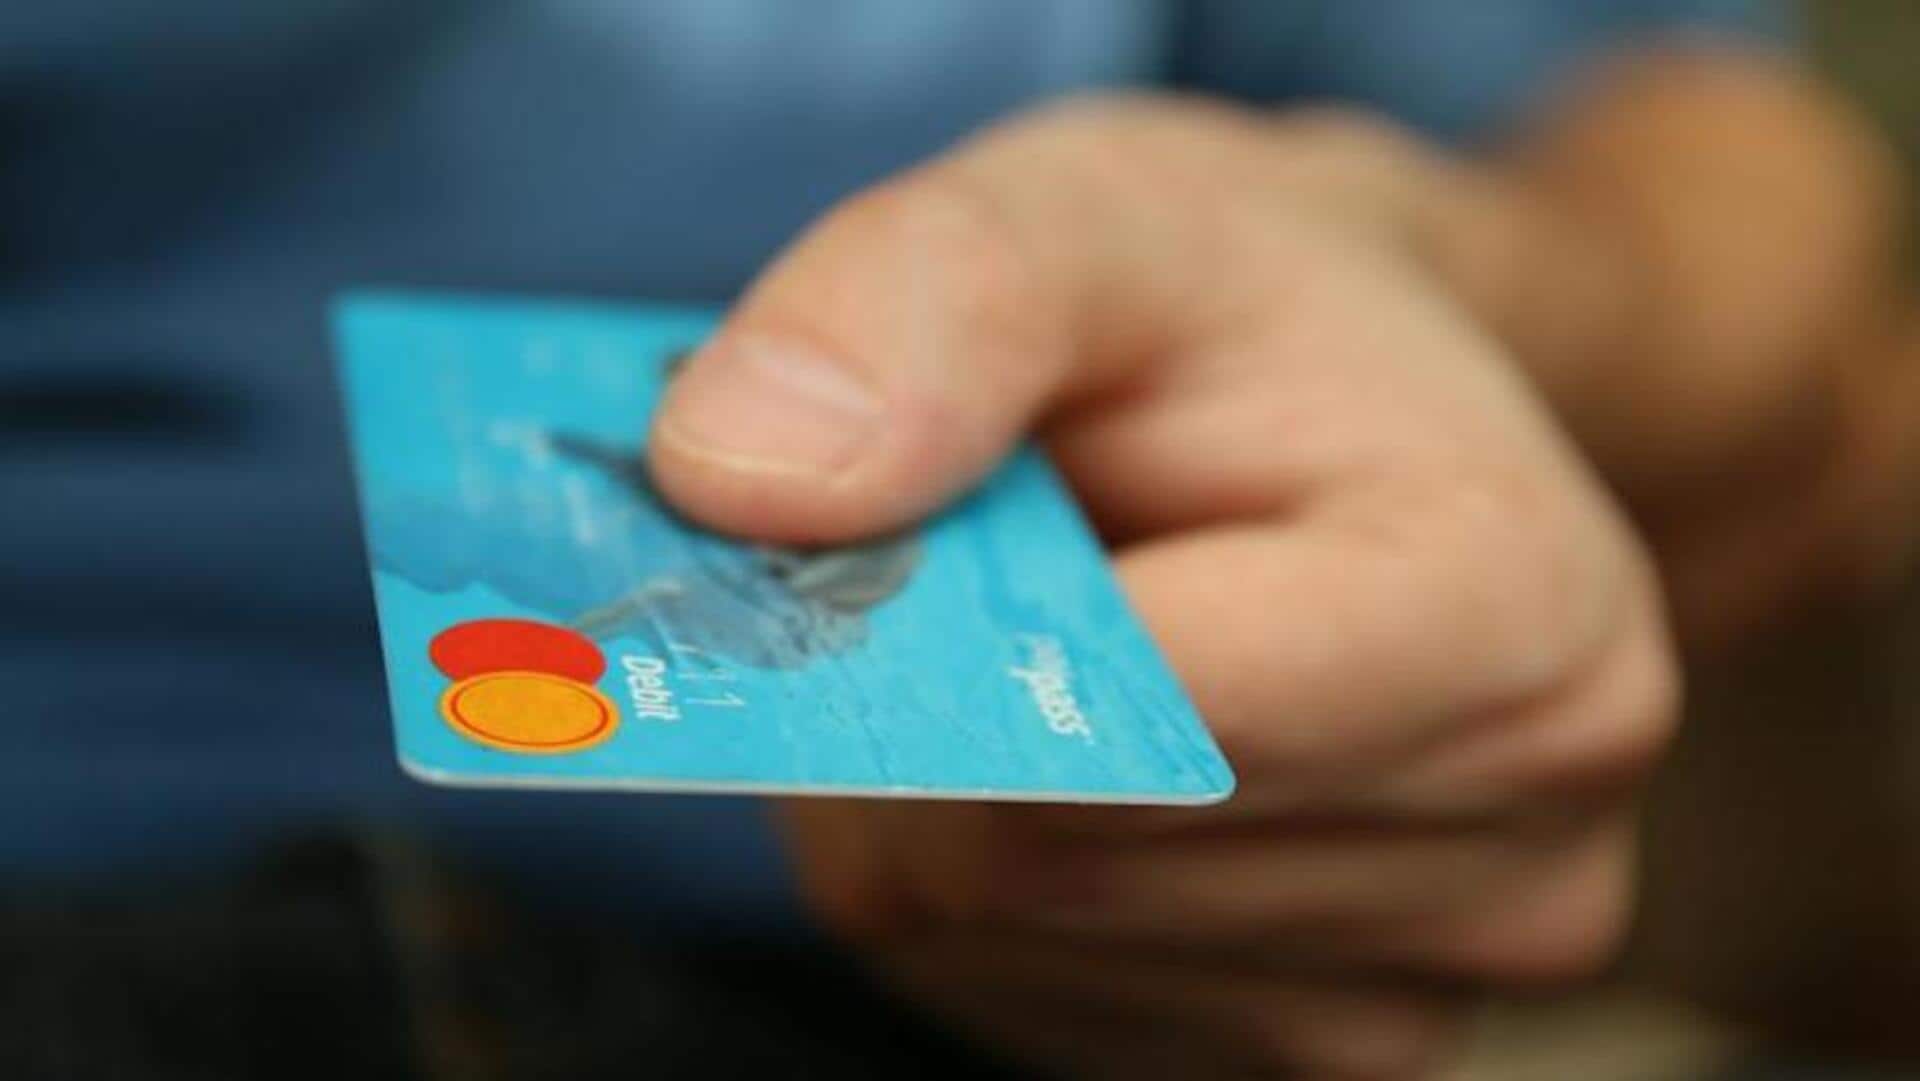 Credit cards for those with a salary below Rs. 40,000 